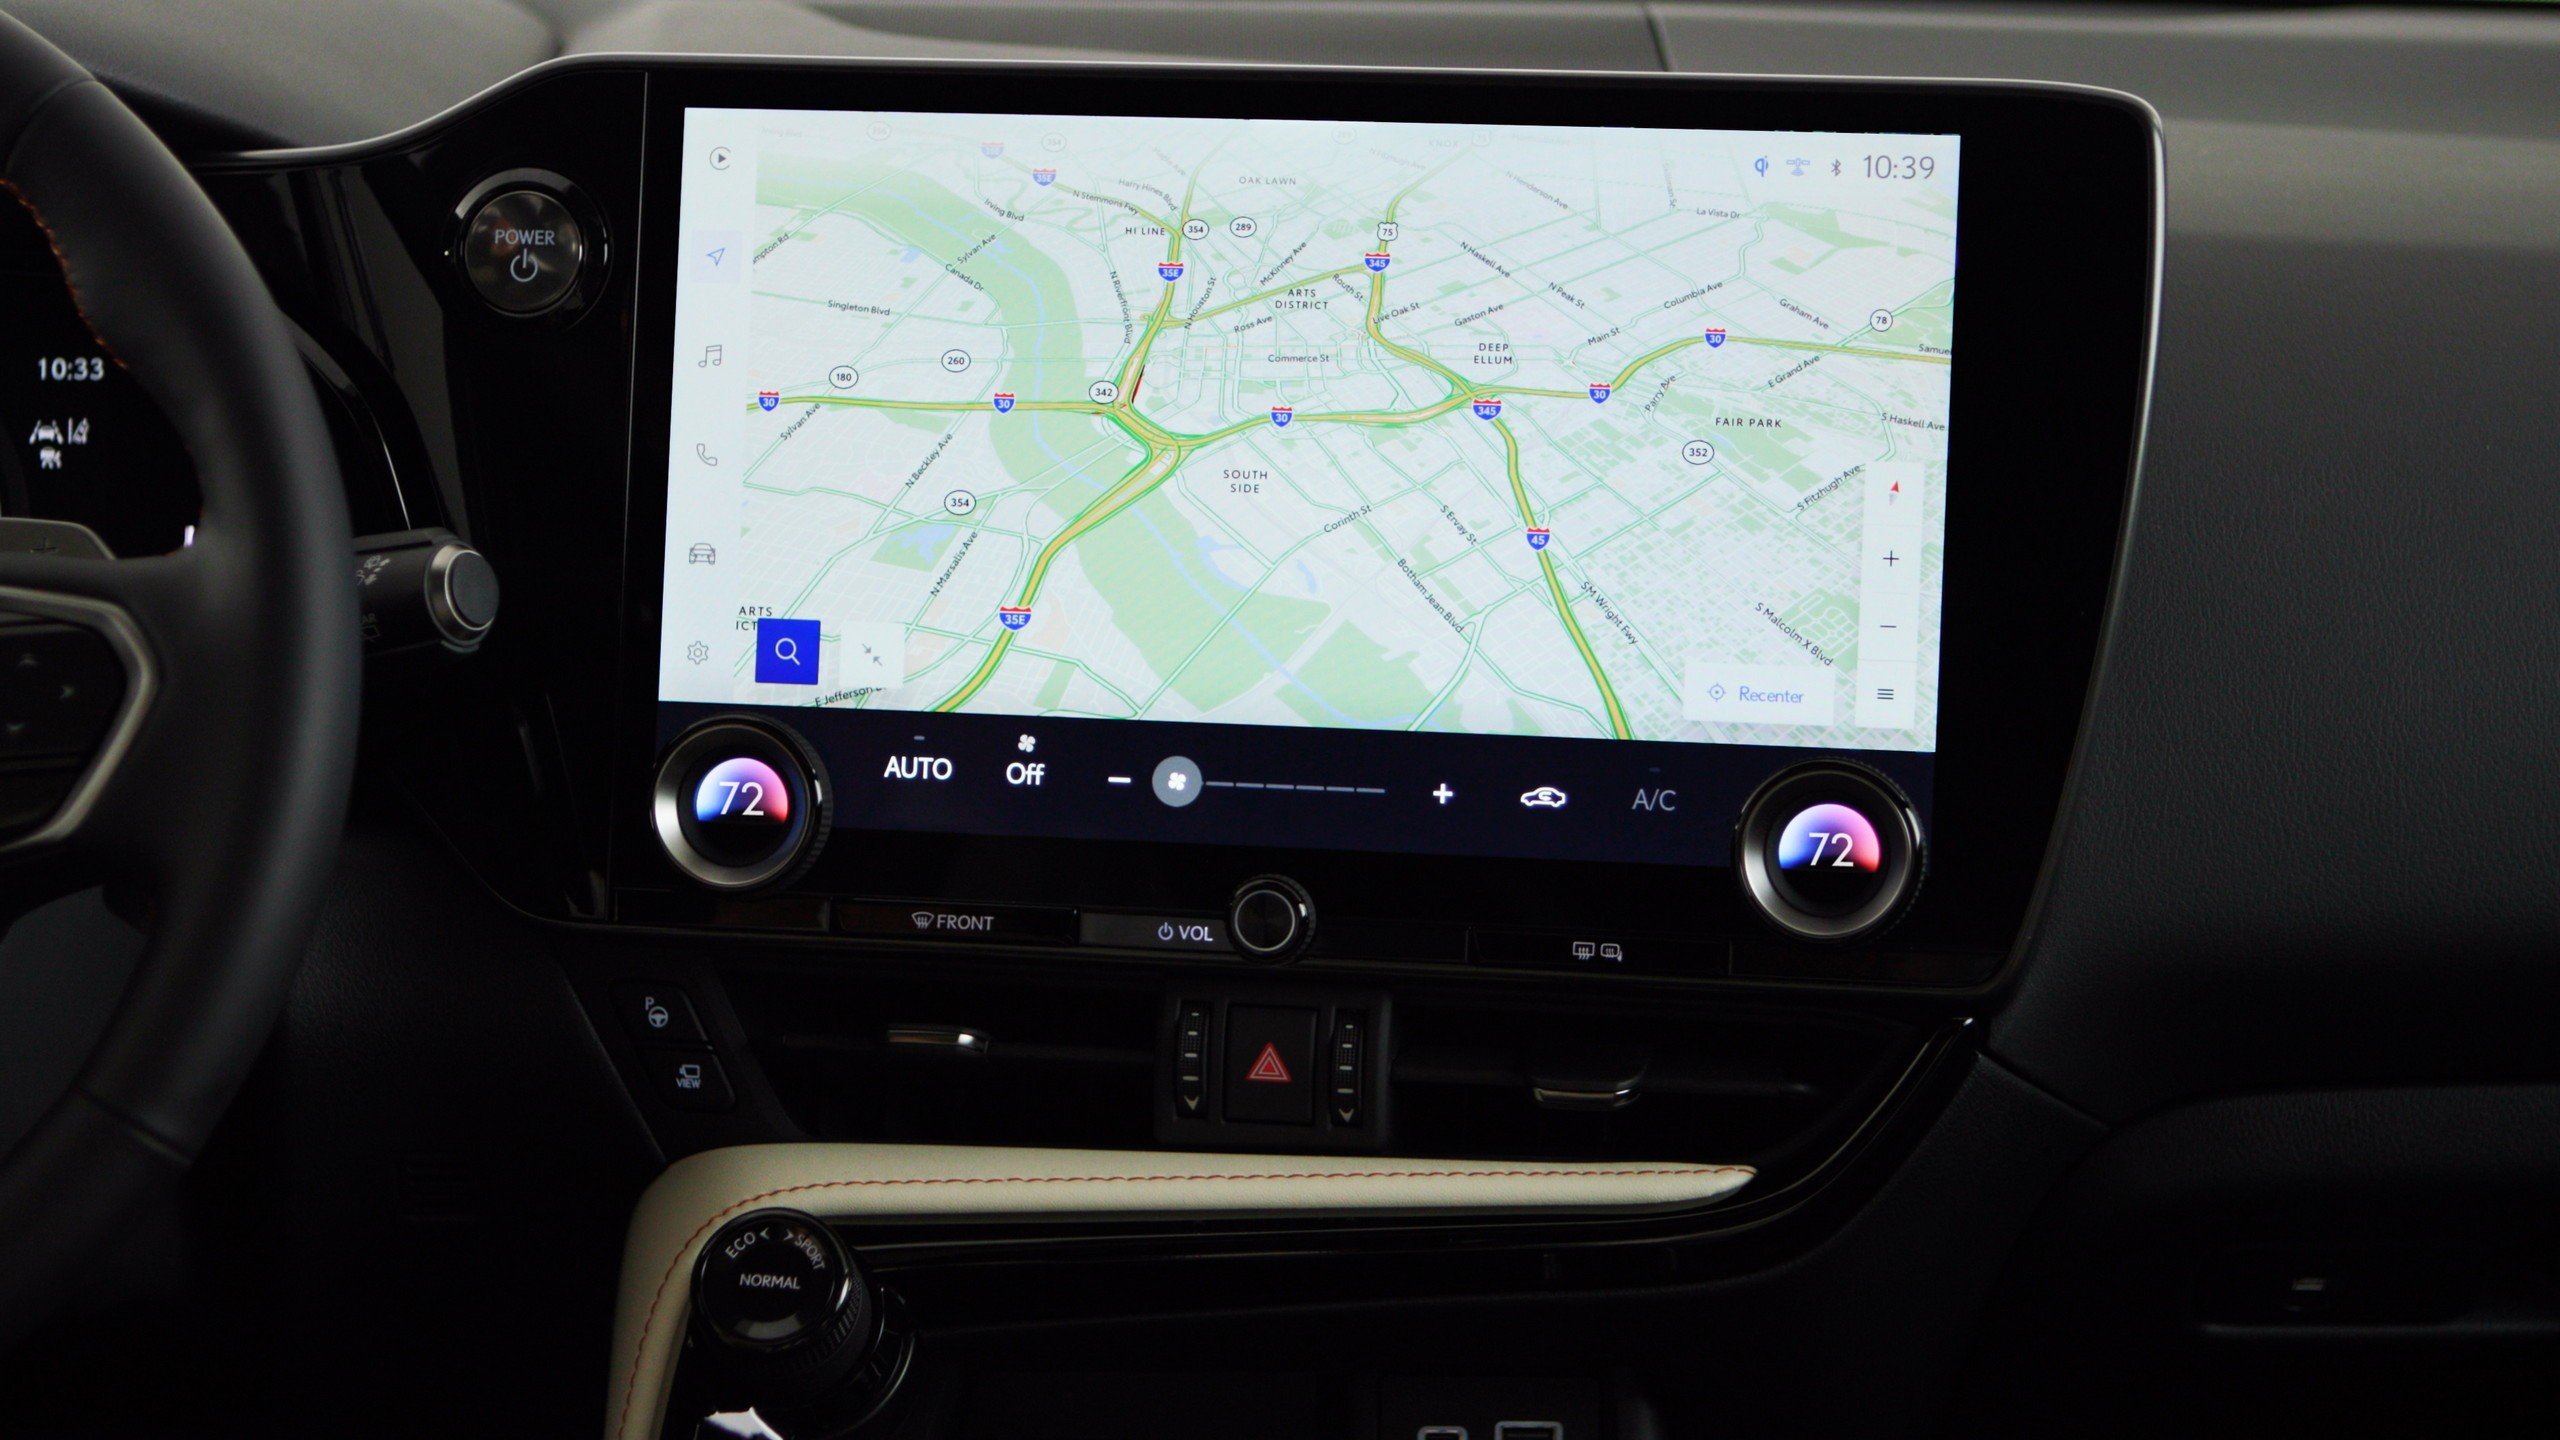 Toyotas New Multimedia System Boasts 14 Inch Touchscreen And Cloud Navigation 4 